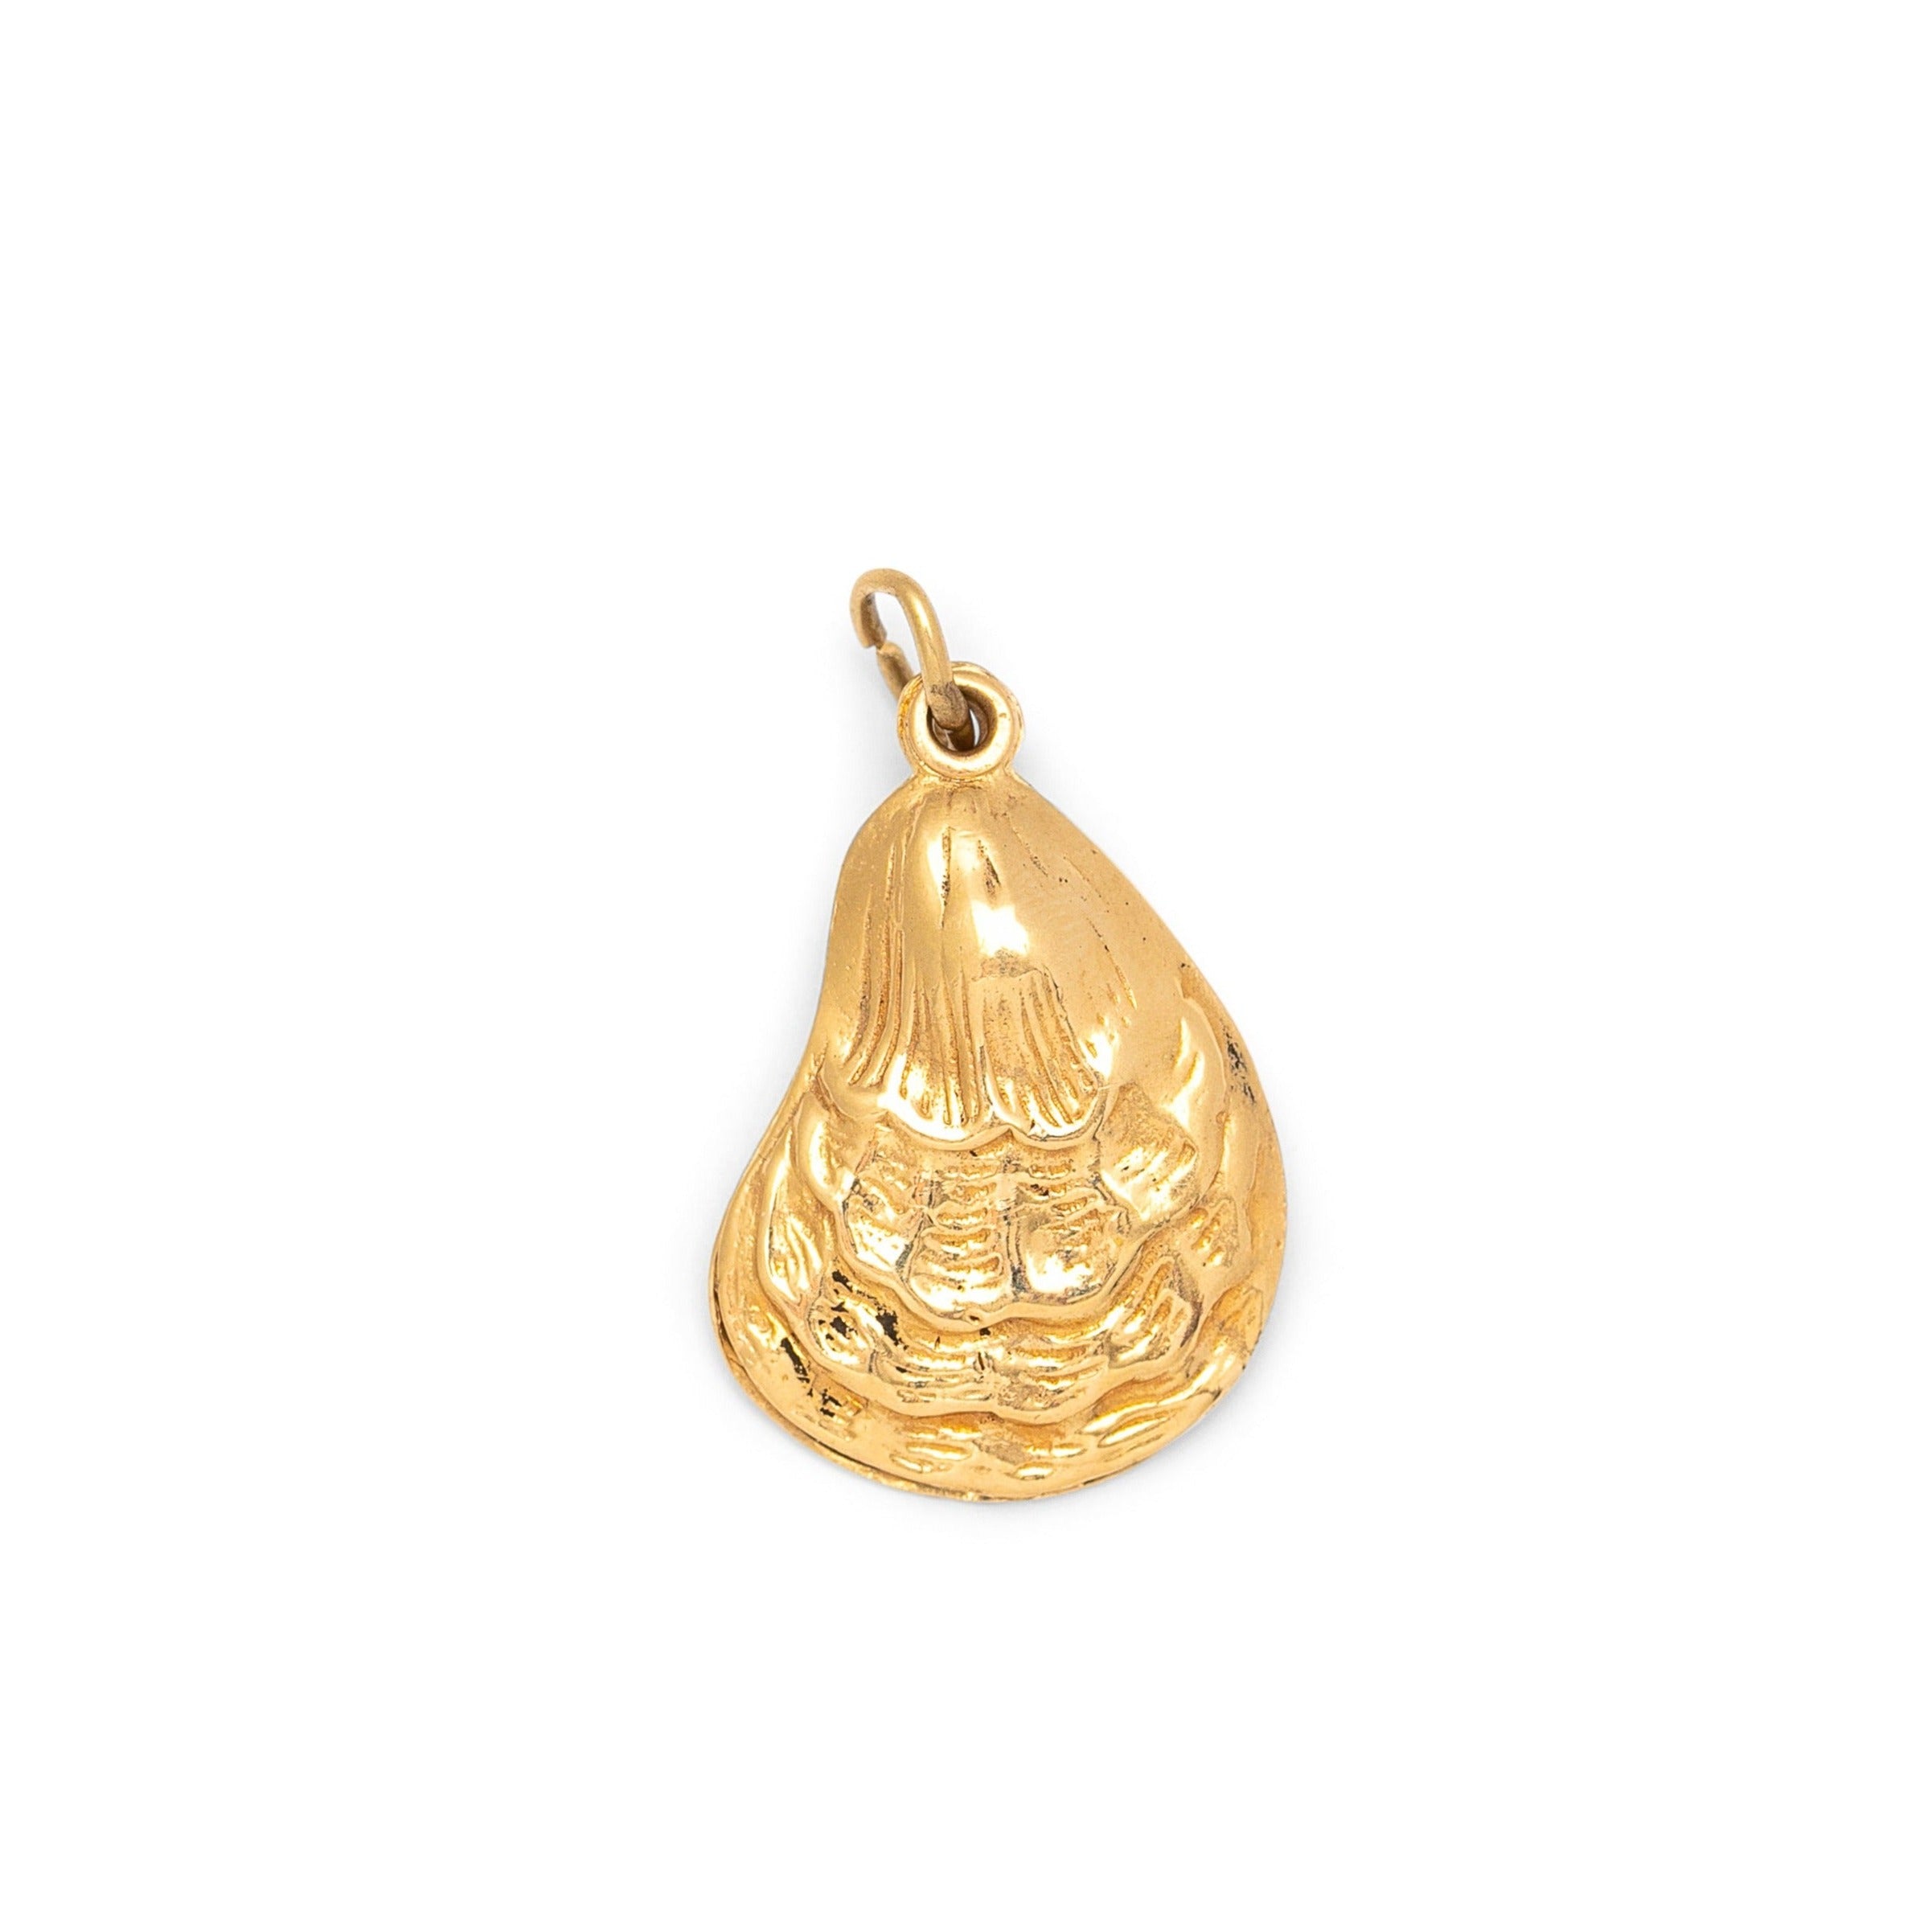 Movable Oyster Shell 14k Gold Vintage Charm